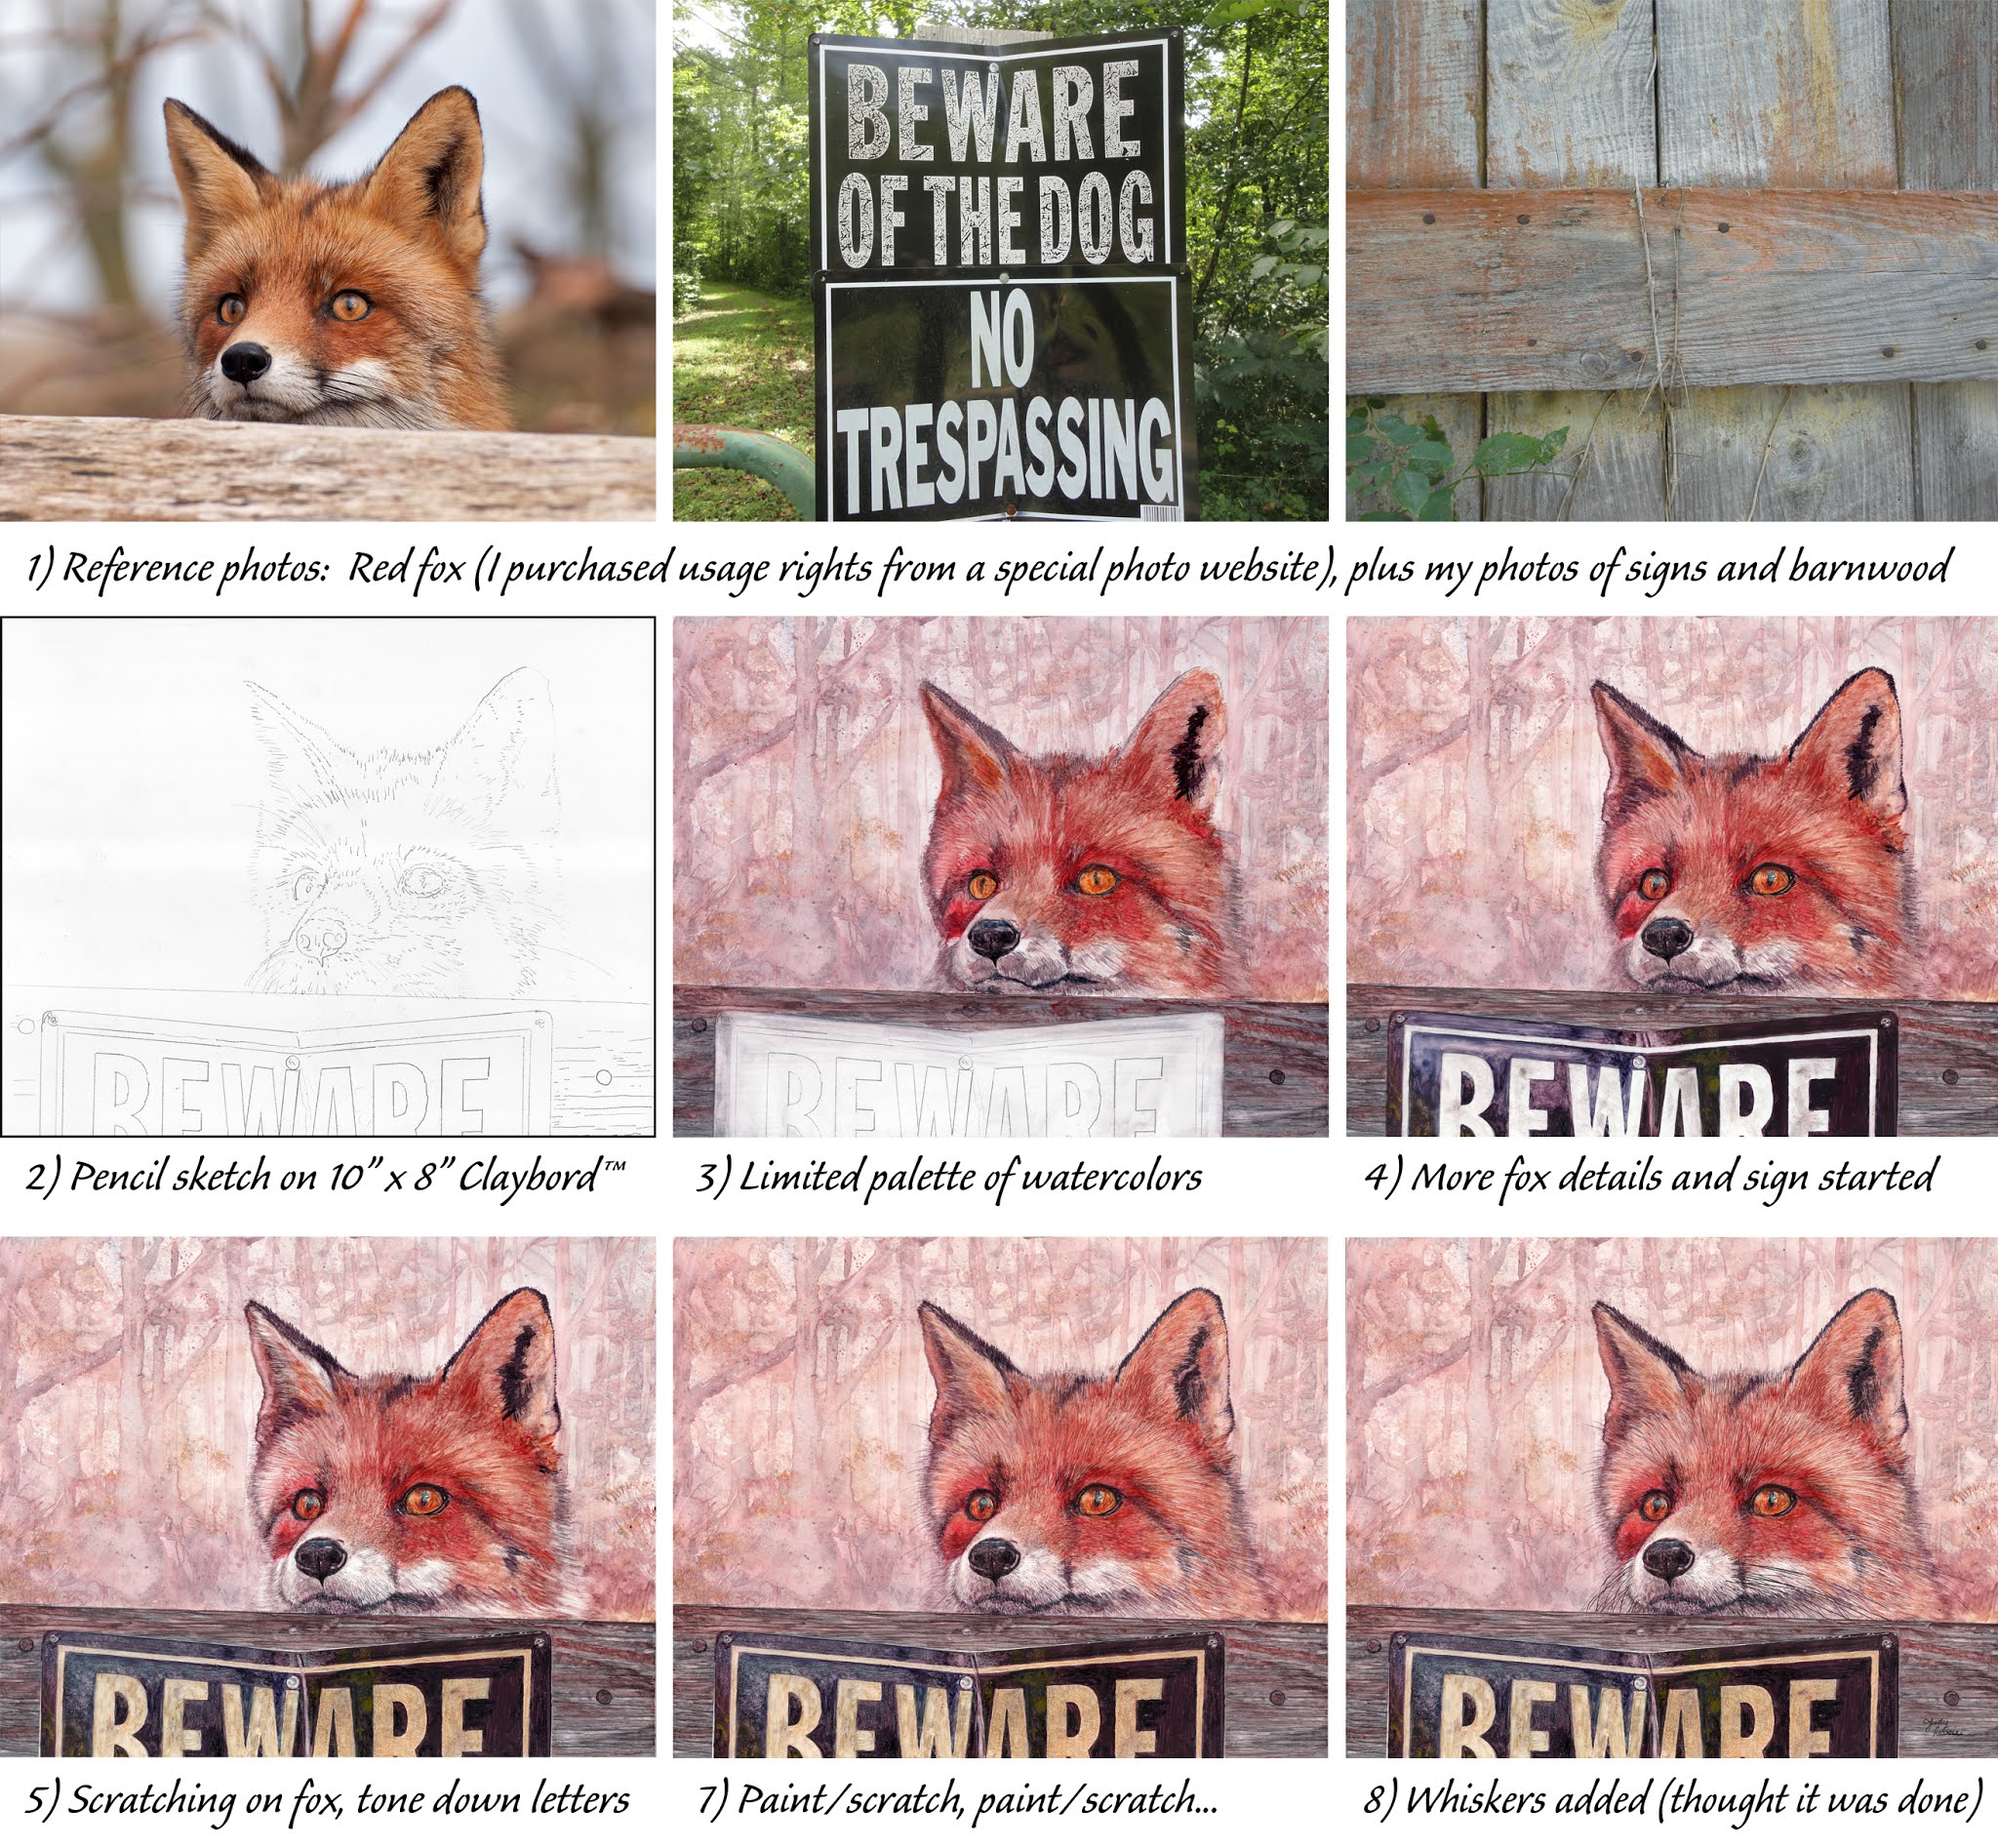 Sample of steps to create "Beware" painting on Claybord by Judy Lavoie